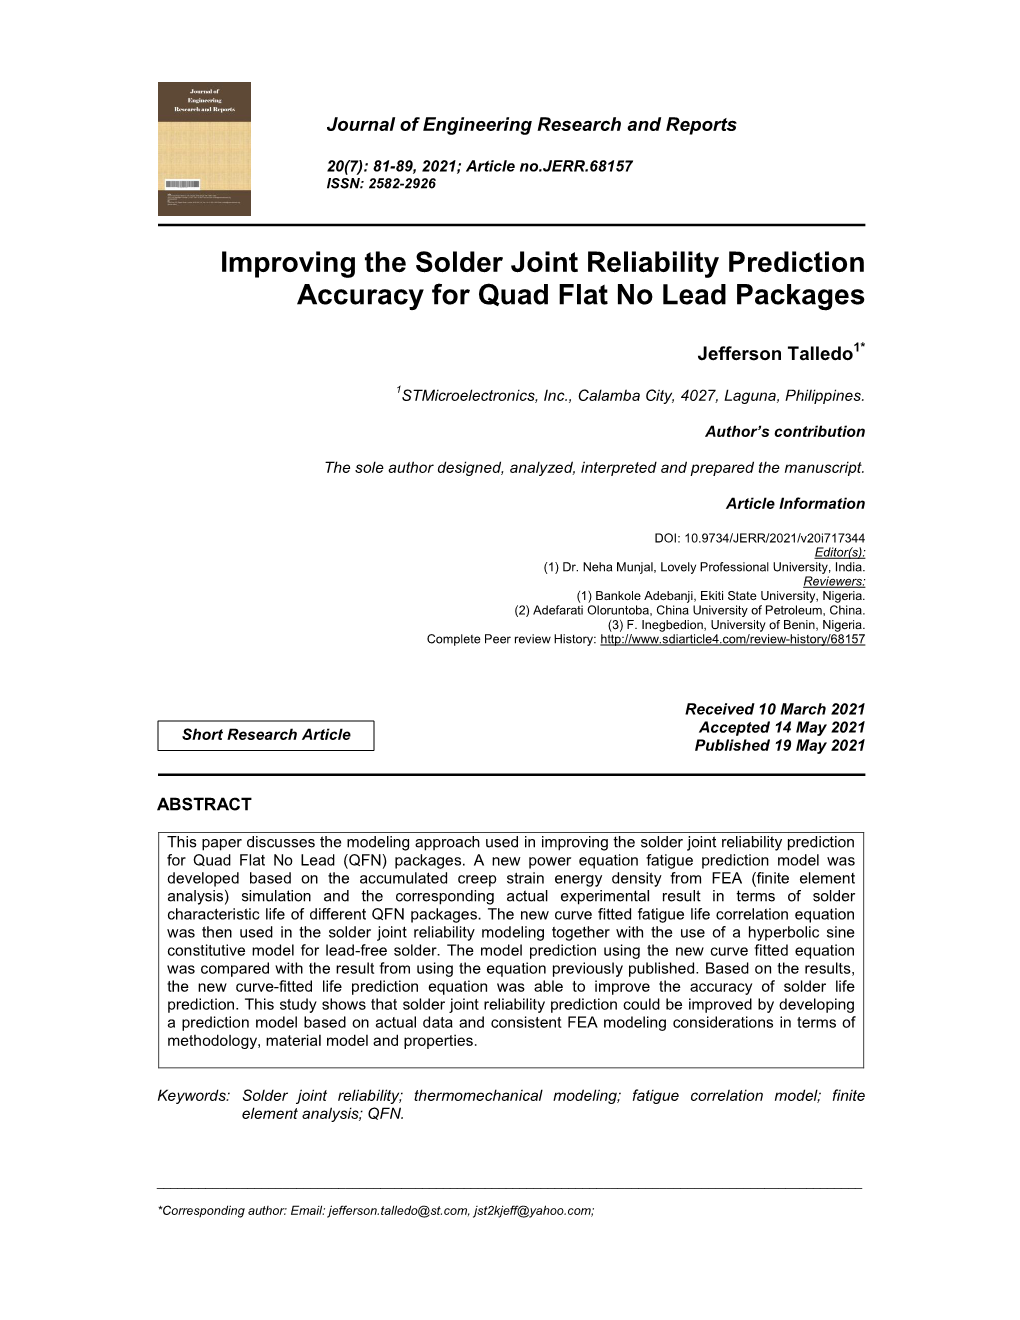 Improving the Solder Joint Reliability Prediction Accuracy for Quad Flat No Lead Packages